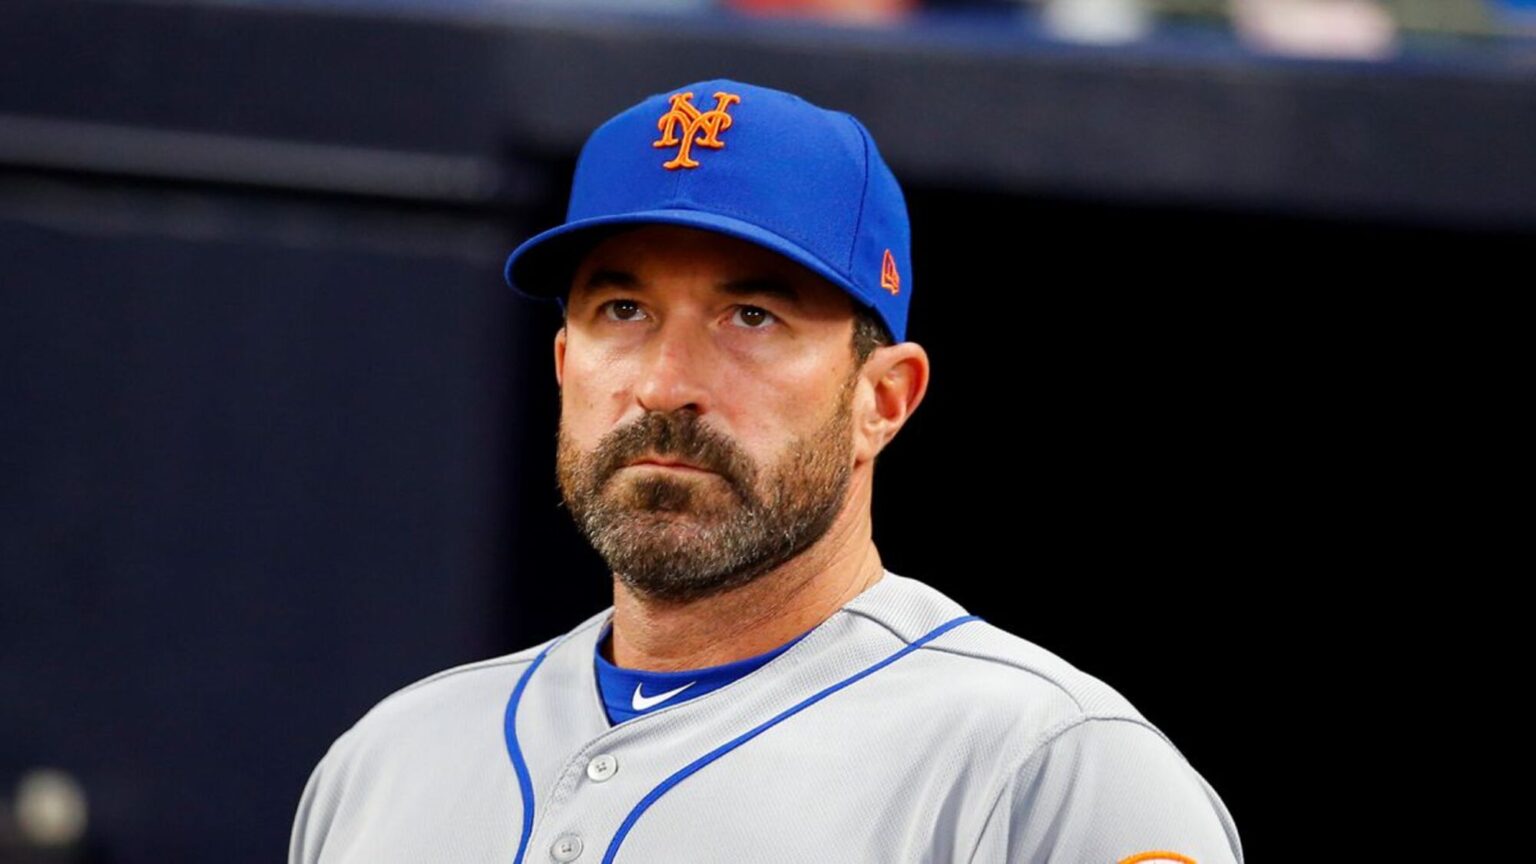 Another sexual allegation? Looks like the Mets Mickey Callaway is under flames. Check out everything we know about the manager's alleged offence.